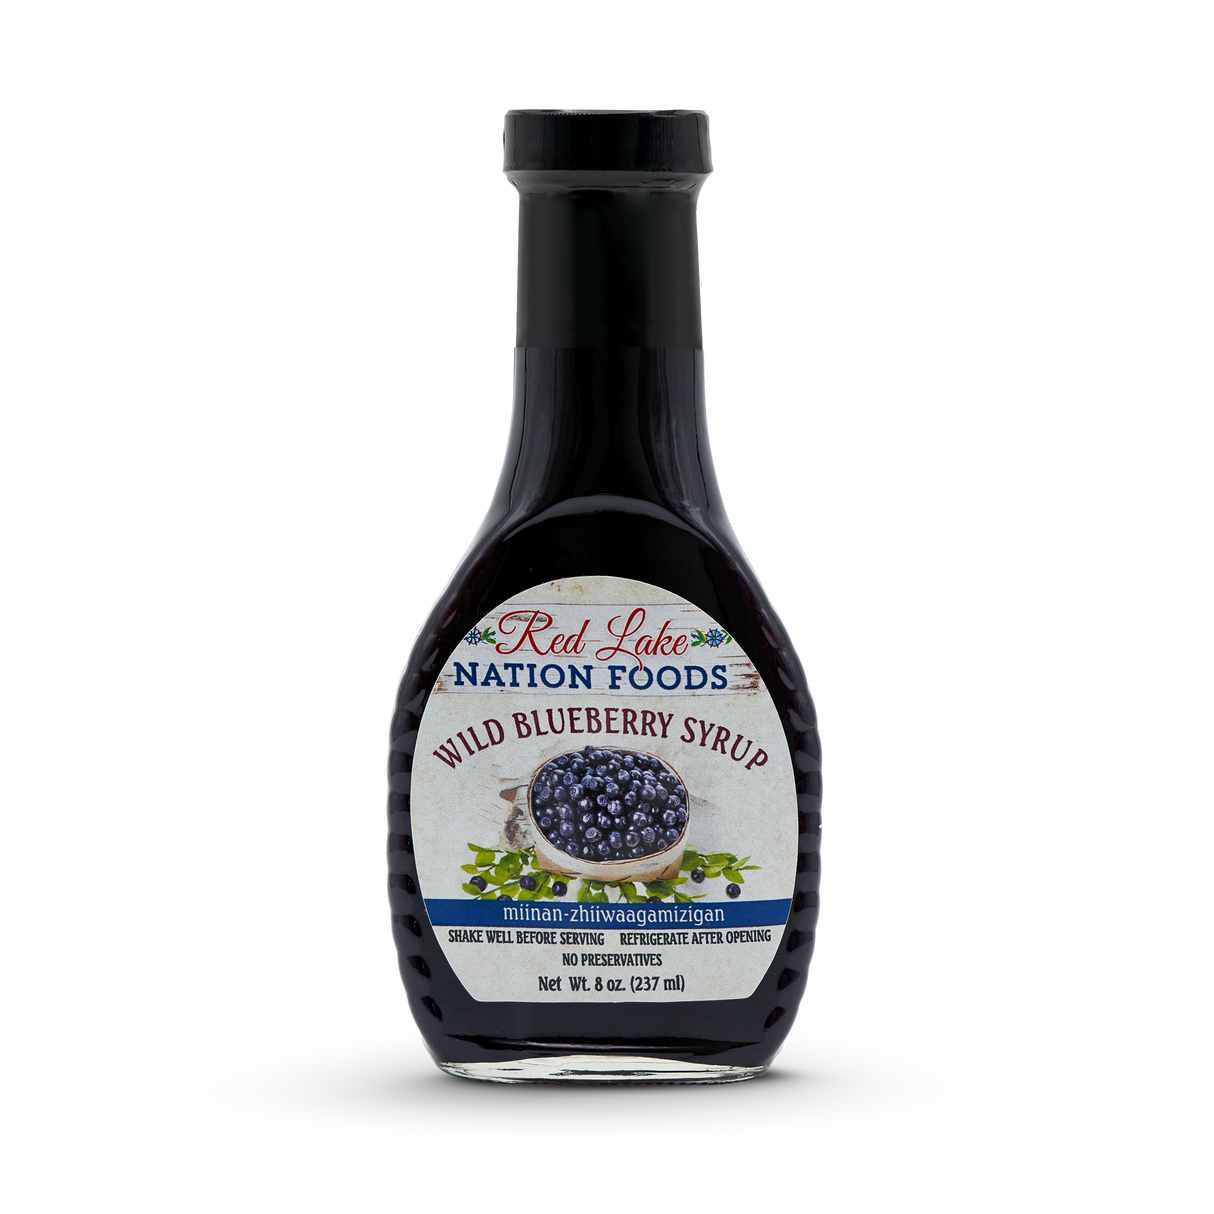 Red Lake Nation Foods Wild Blueberry Syrup (miinan-zhiiwaagamizigan)